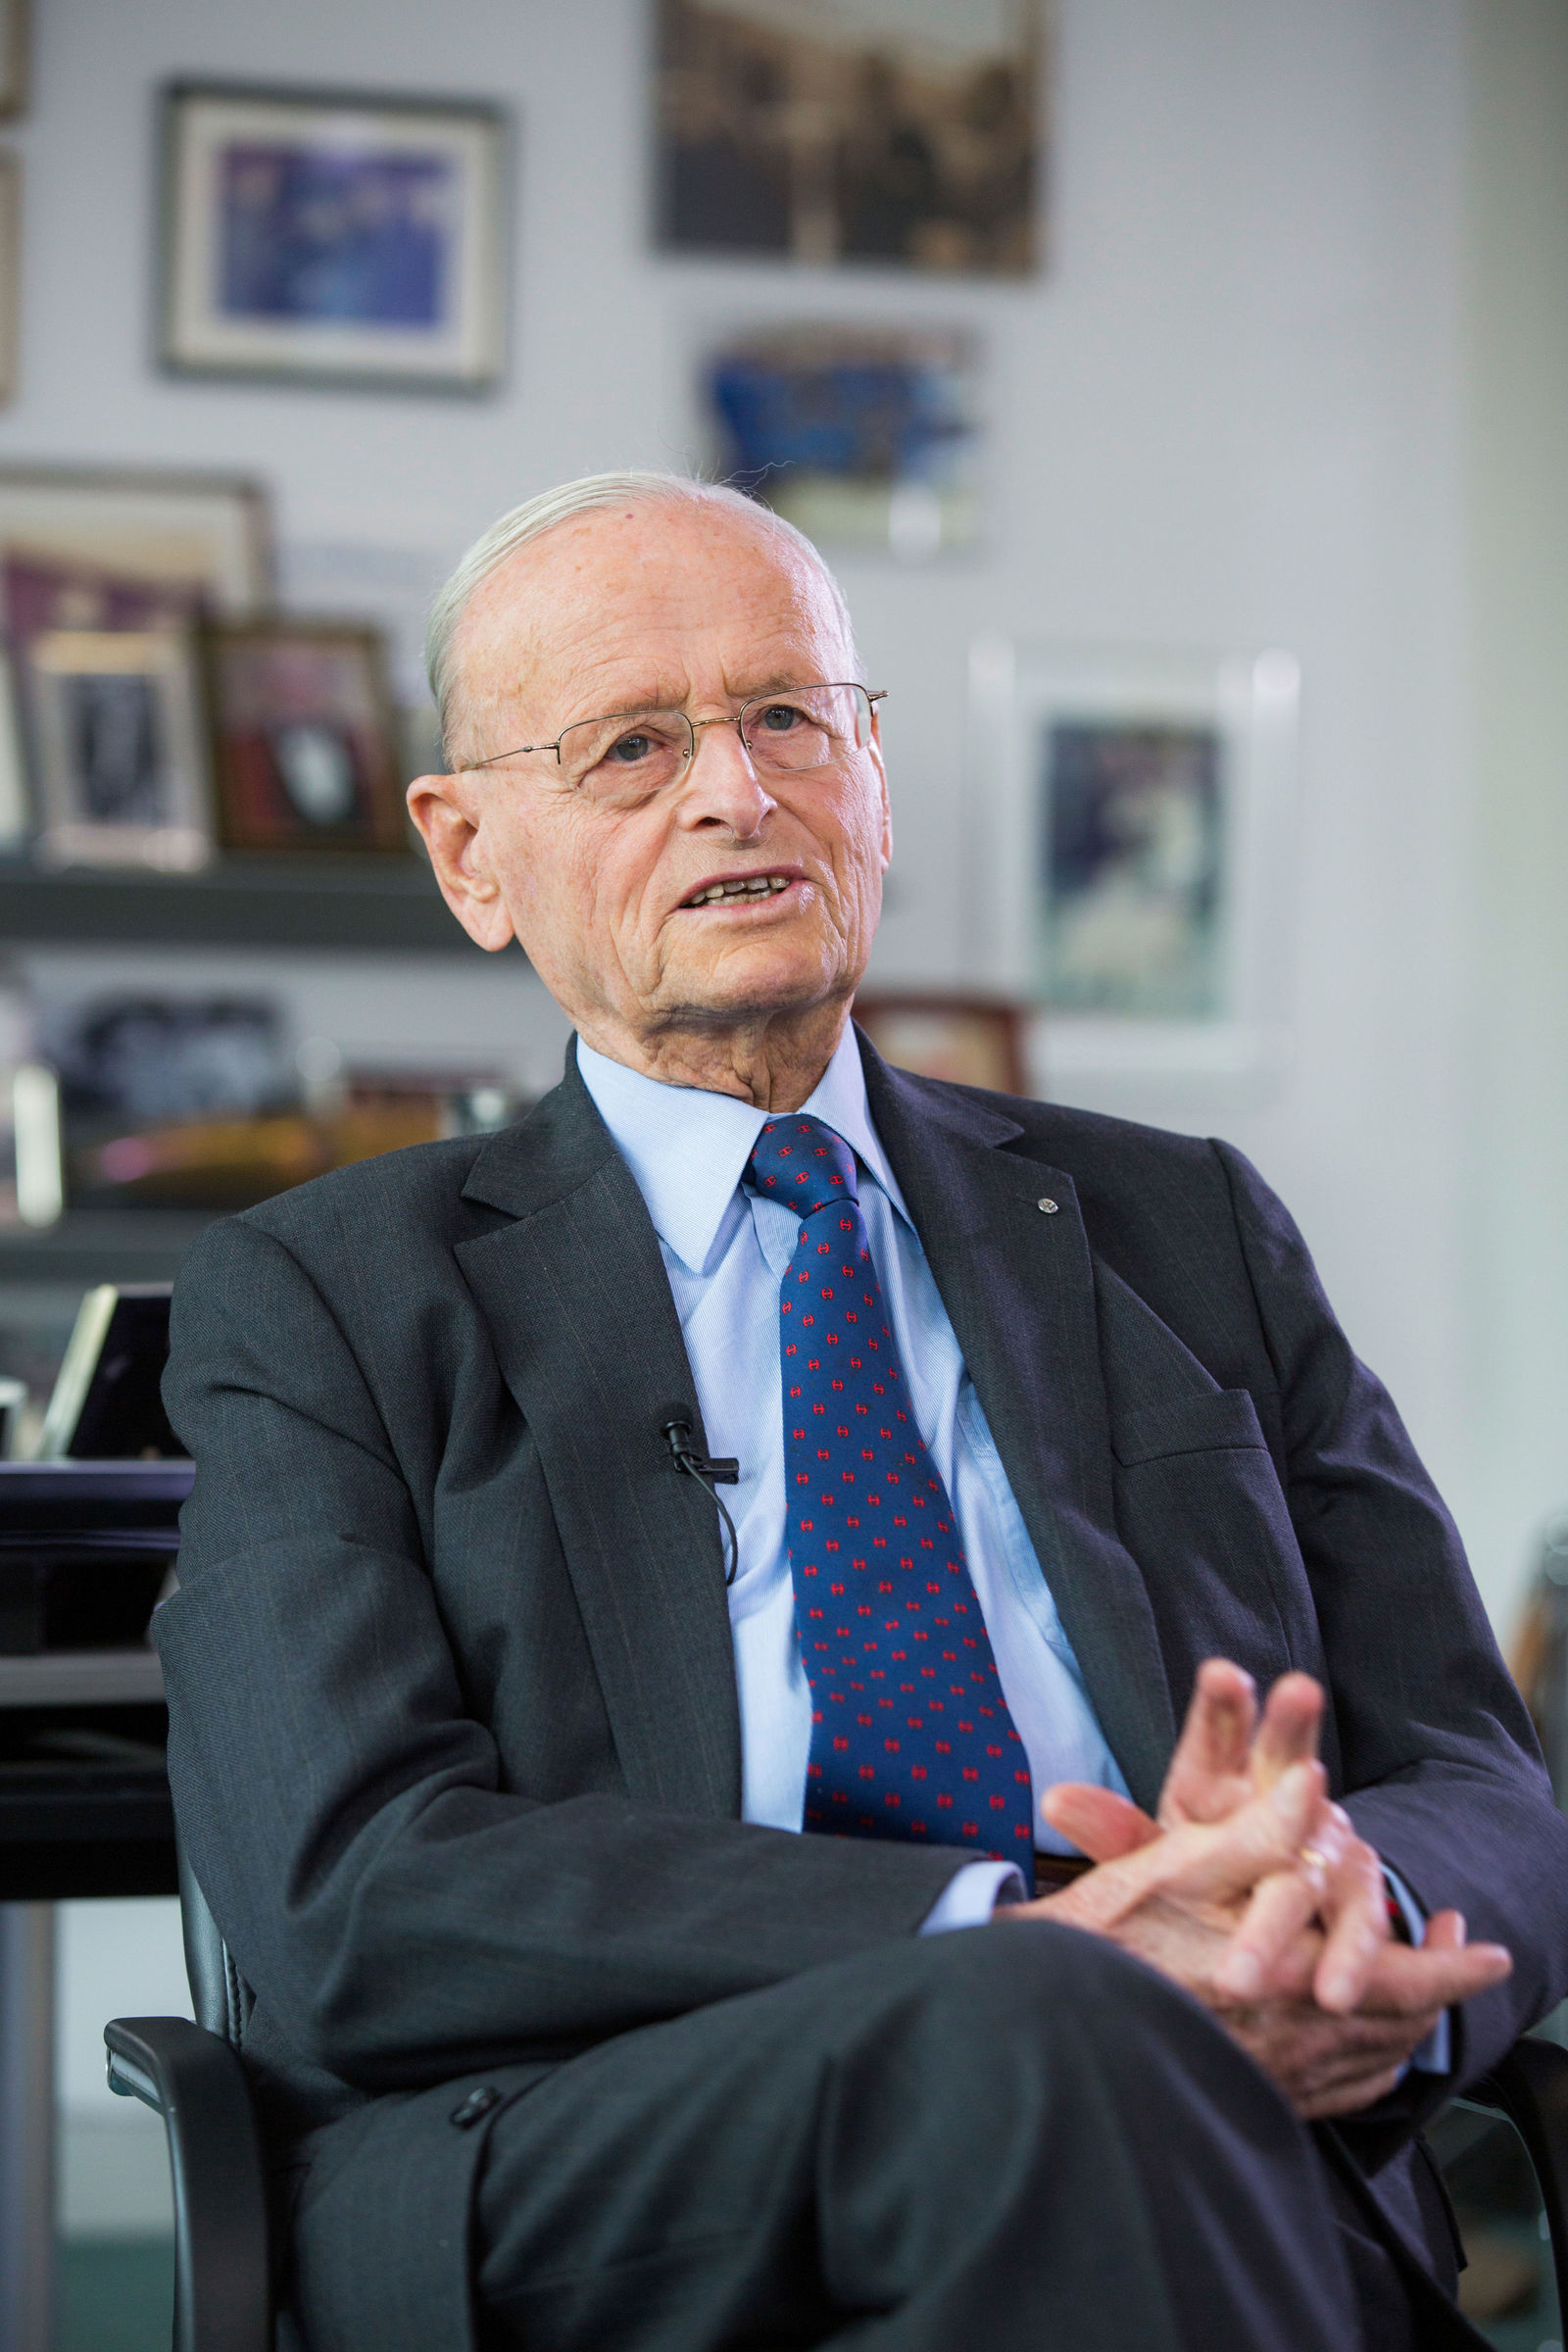 Prof. Dr. Carl H. Hahn, Former Chairman of the Board of Management of Volkswagen AG (1982 – 1992)